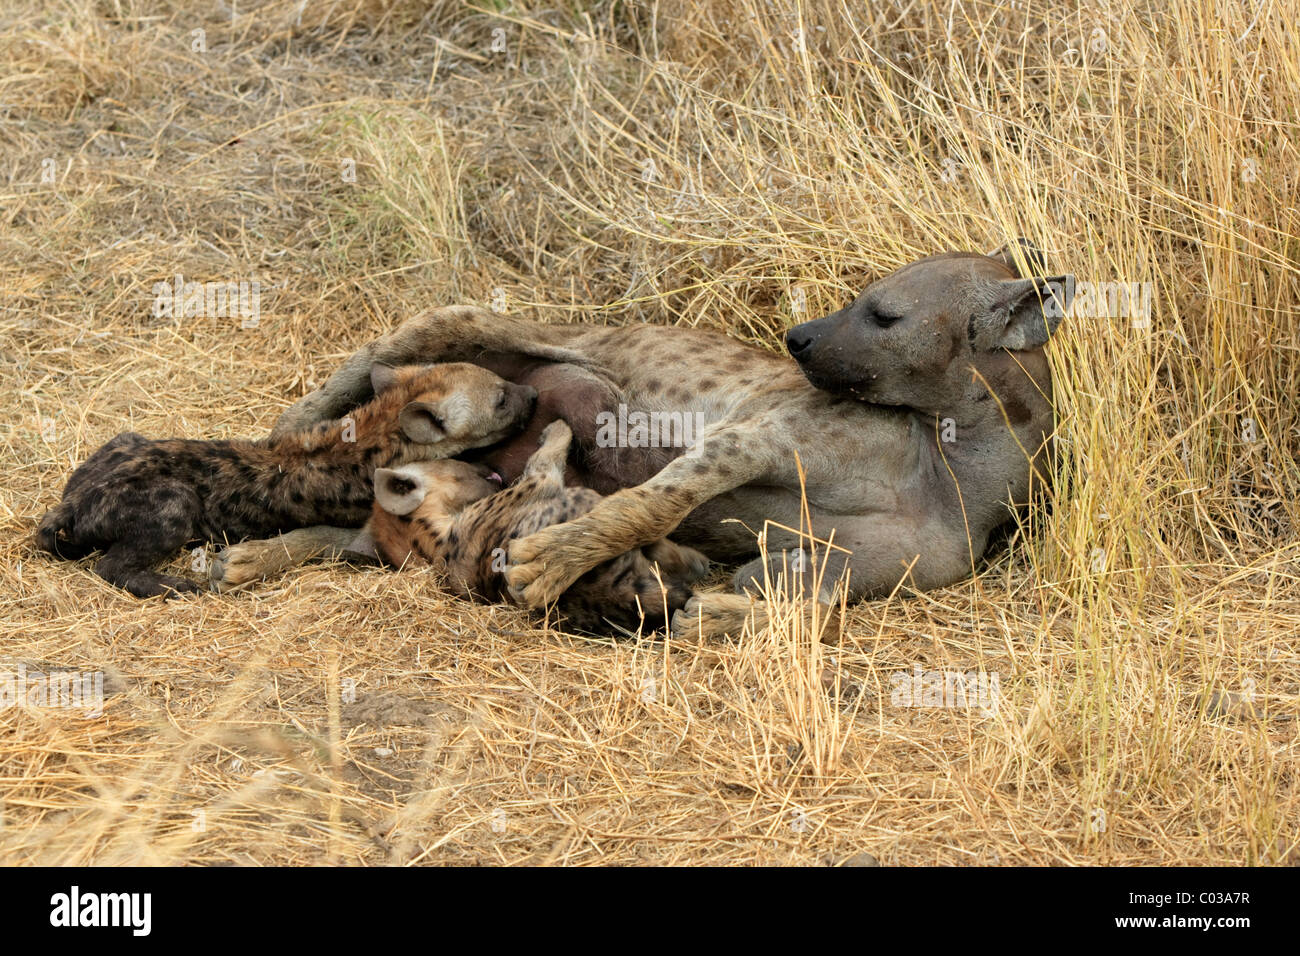 Spotted Hyena (Crocuta crocuta), female adult feeding her cubs, Kruger National Park, South Africa, Africa Stock Photo